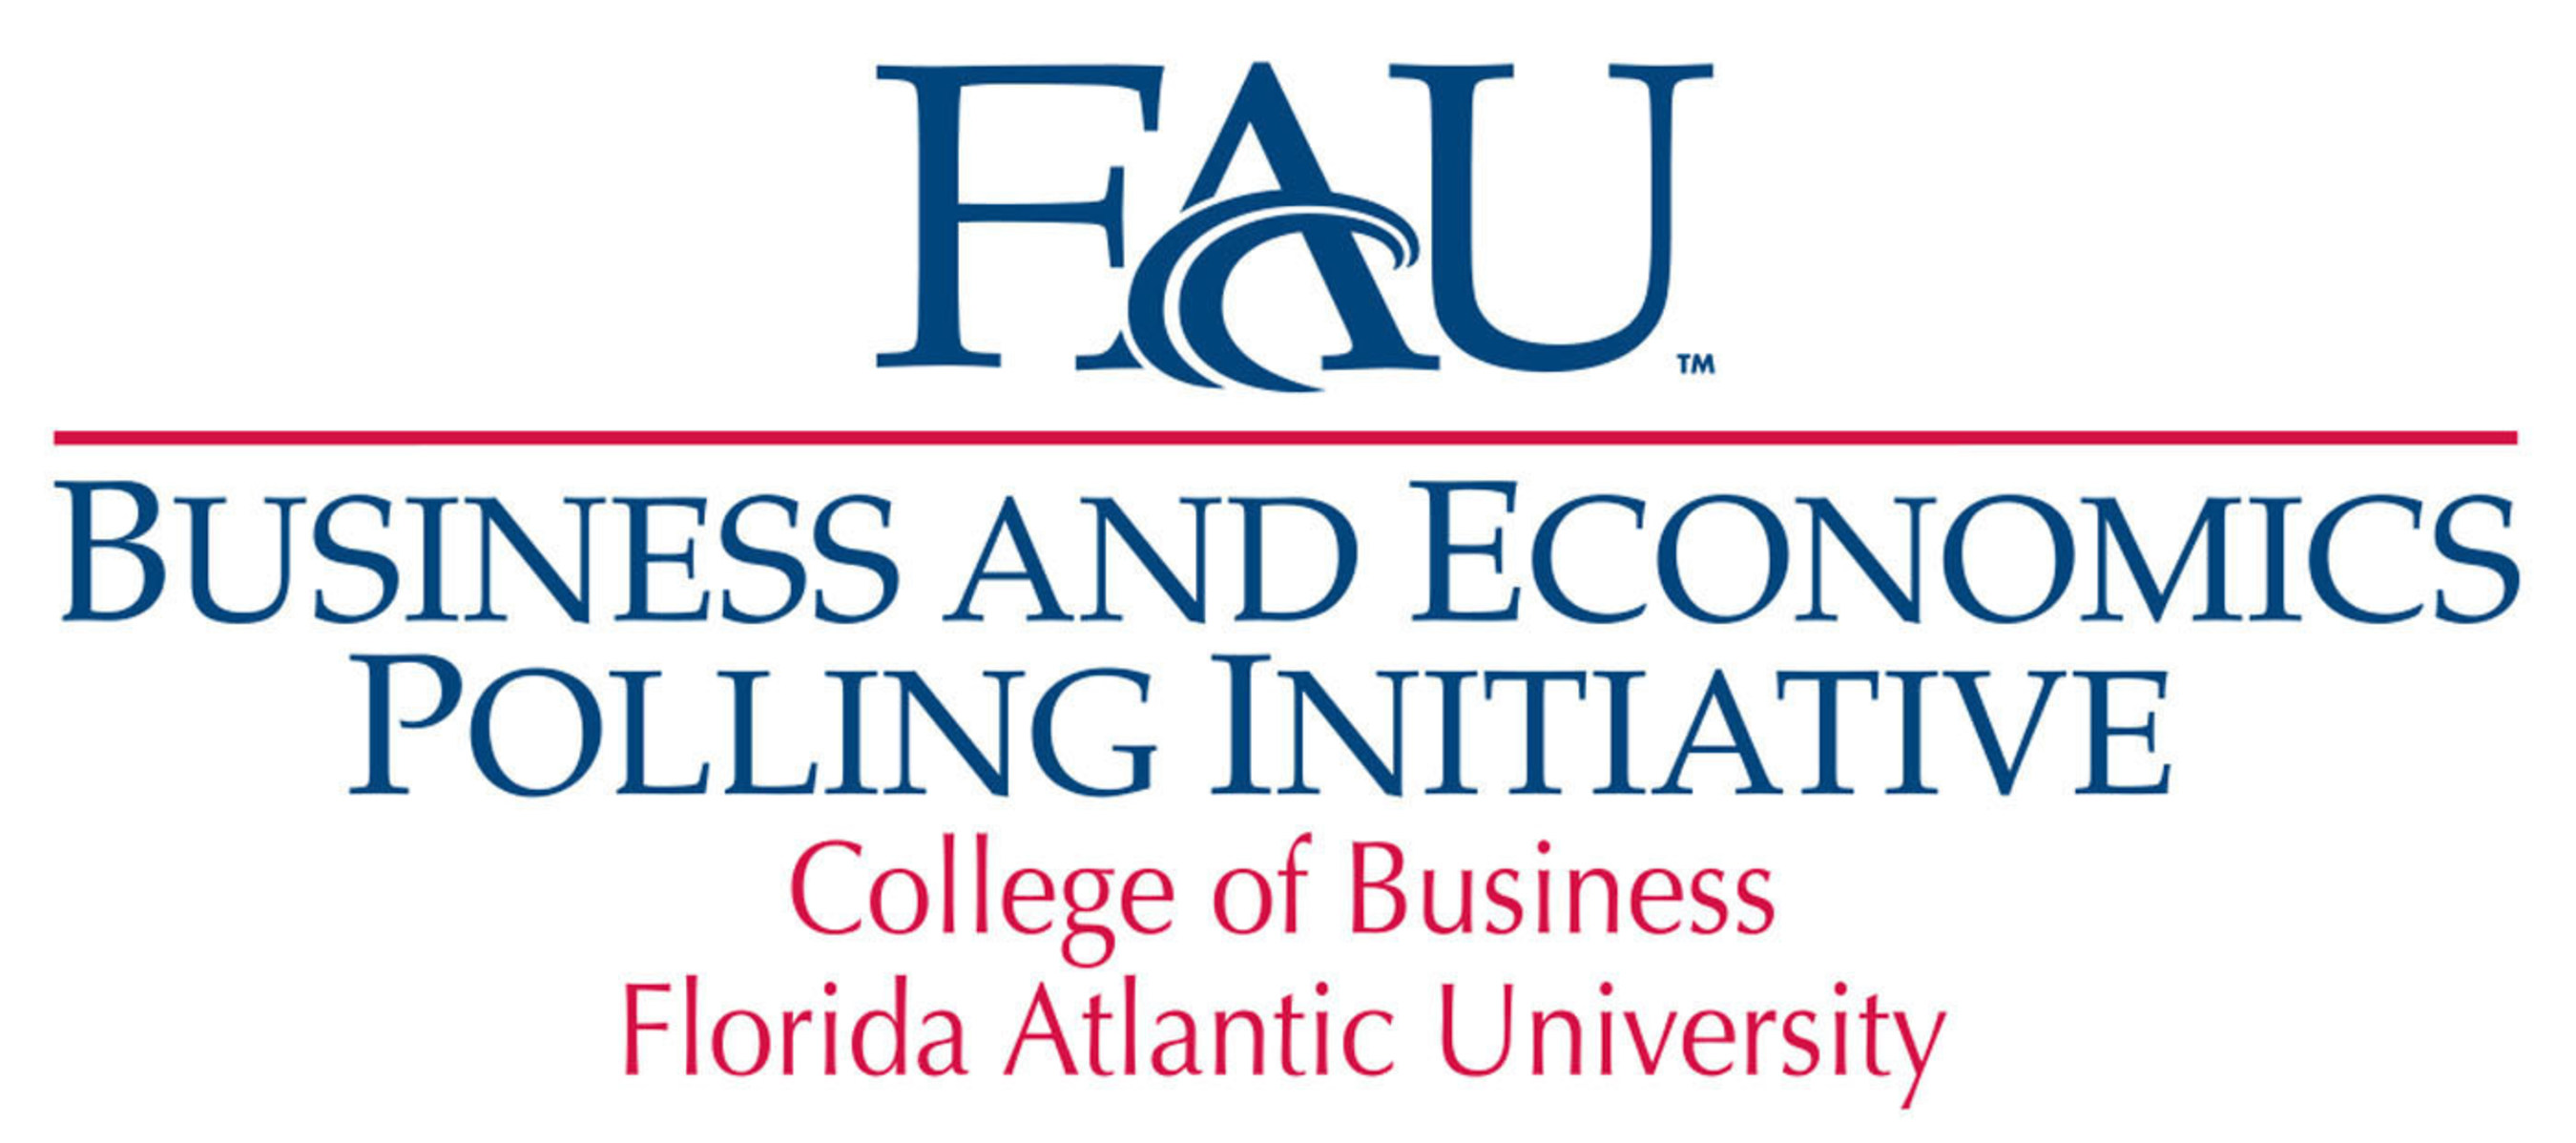 The Business and Economics Polling Initiative (BEPI) at Florida Atlantic University conducts surveys on business, economic, political, and social issues with main focus on Hispanic attitudes and opinions at regional, state and national levels. (PRNewsFoto/Business and Economics Polling..)